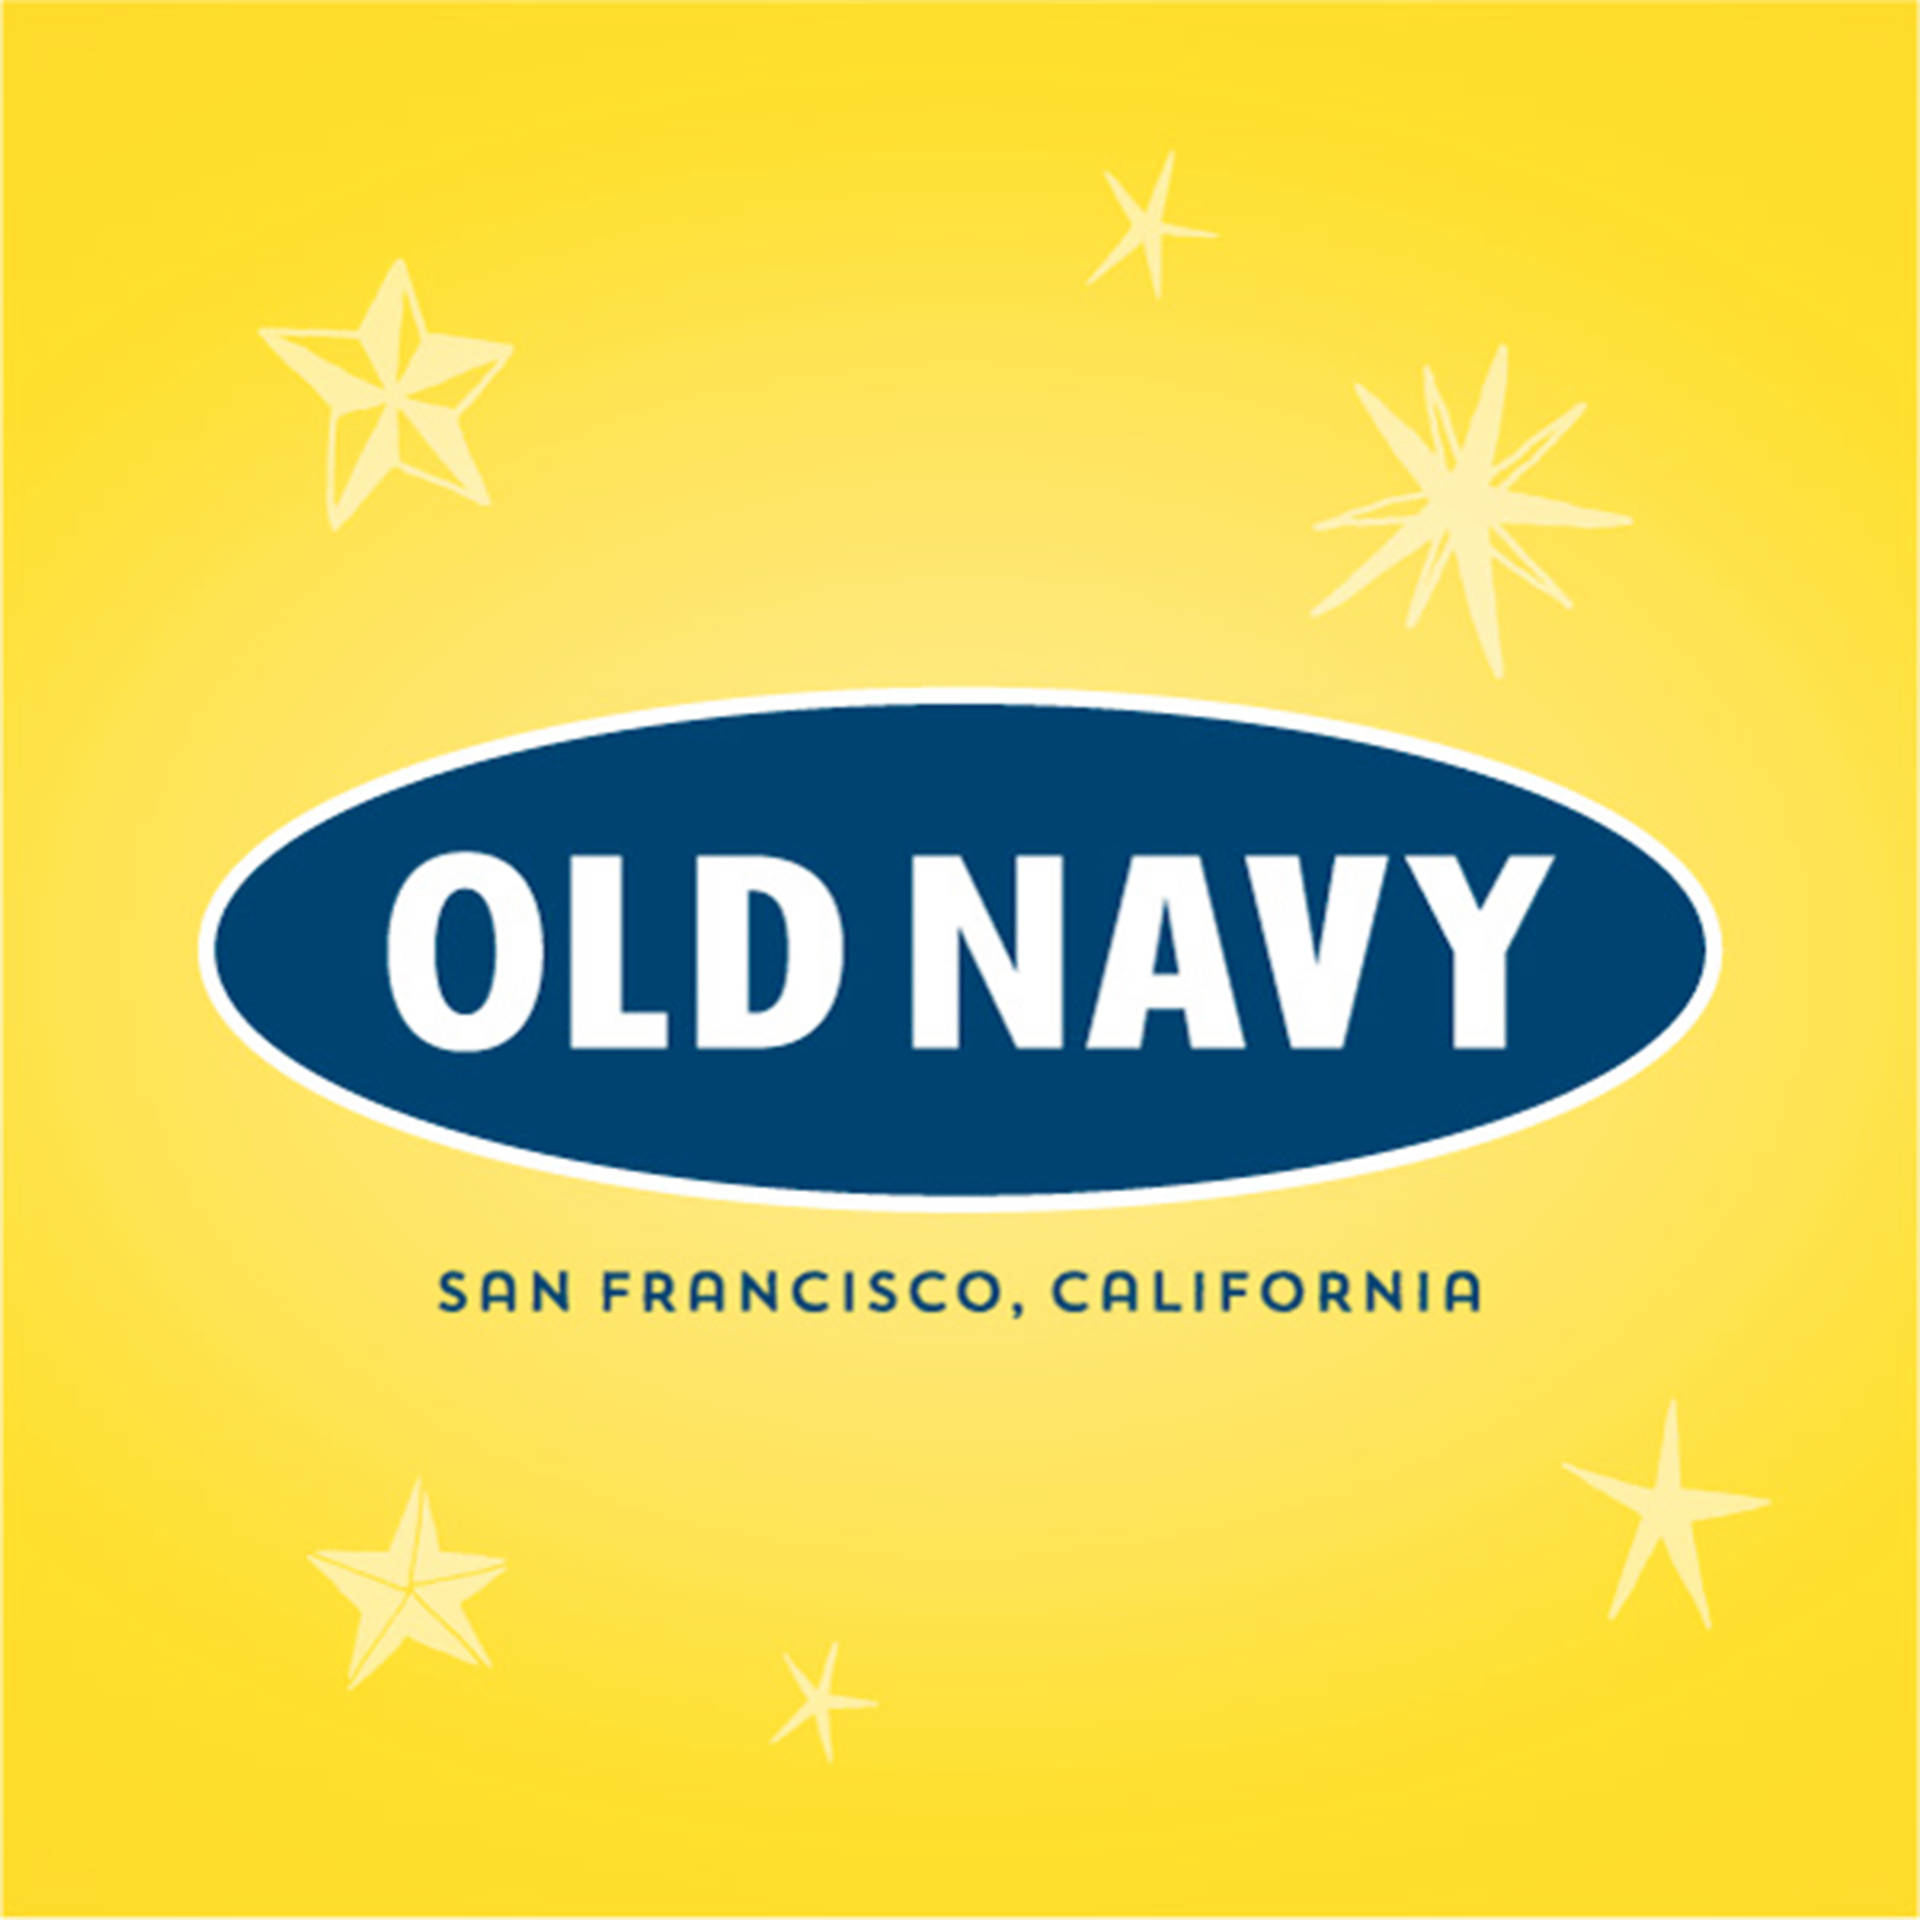 Top 999+ Old Navy Wallpaper Full HD, 4K Free to Use